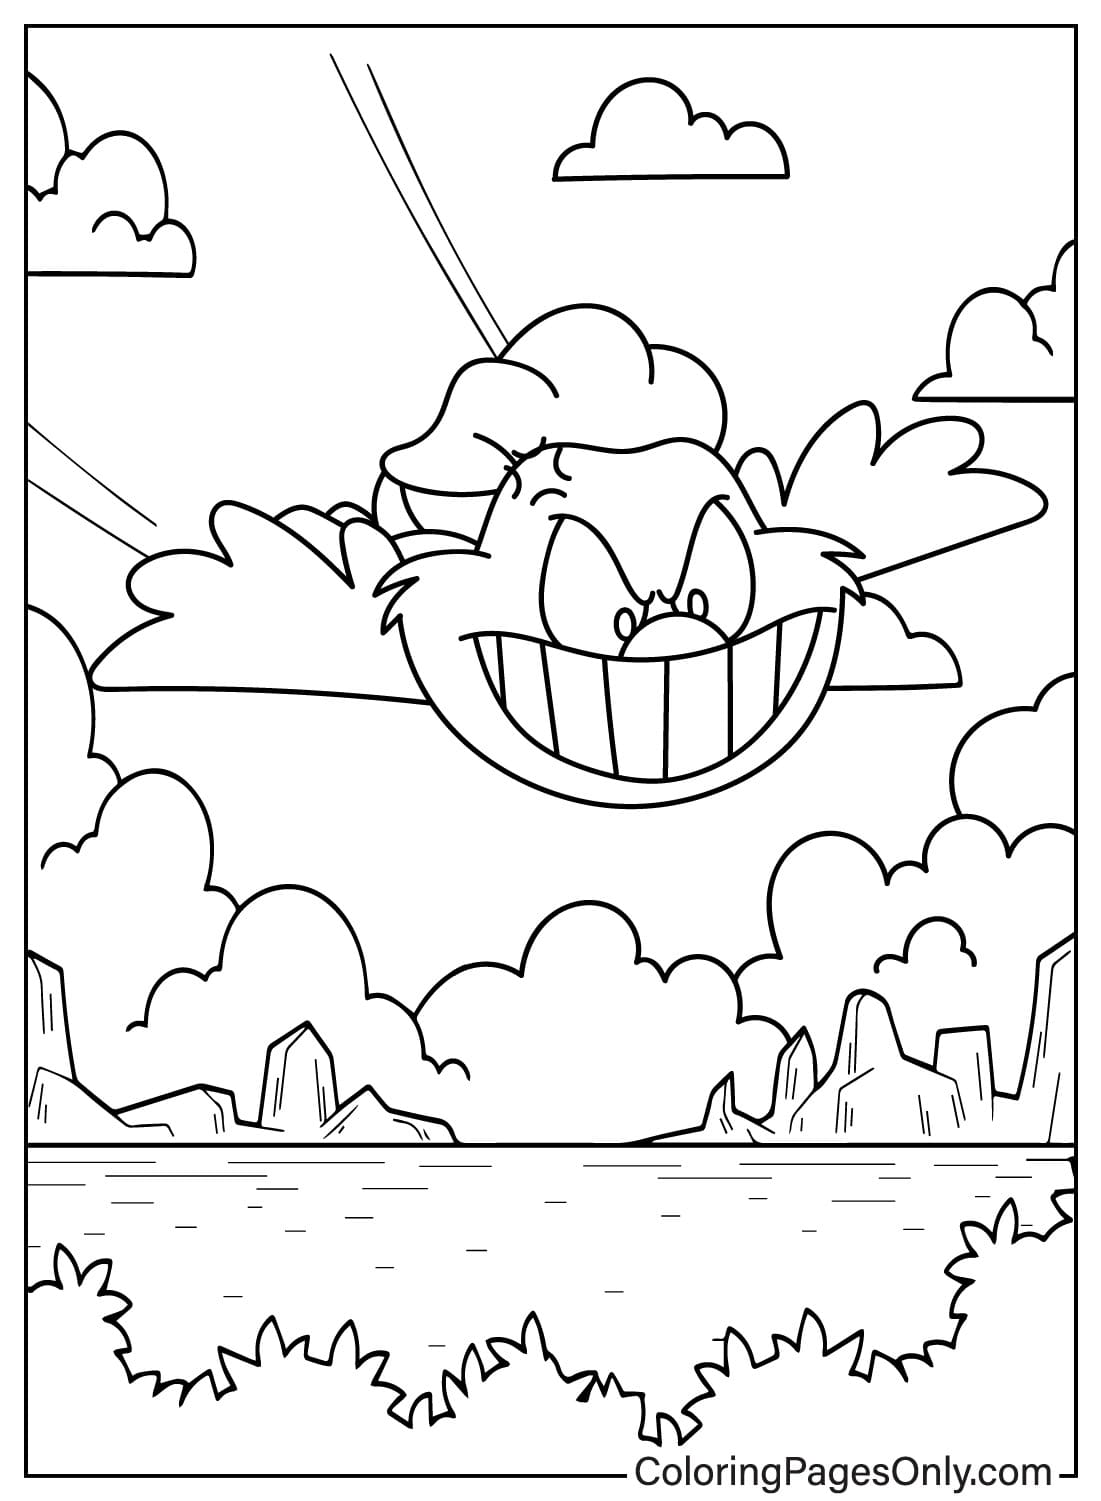 KickinChicken Fly in the Sky Coloring Page from KickinChicken